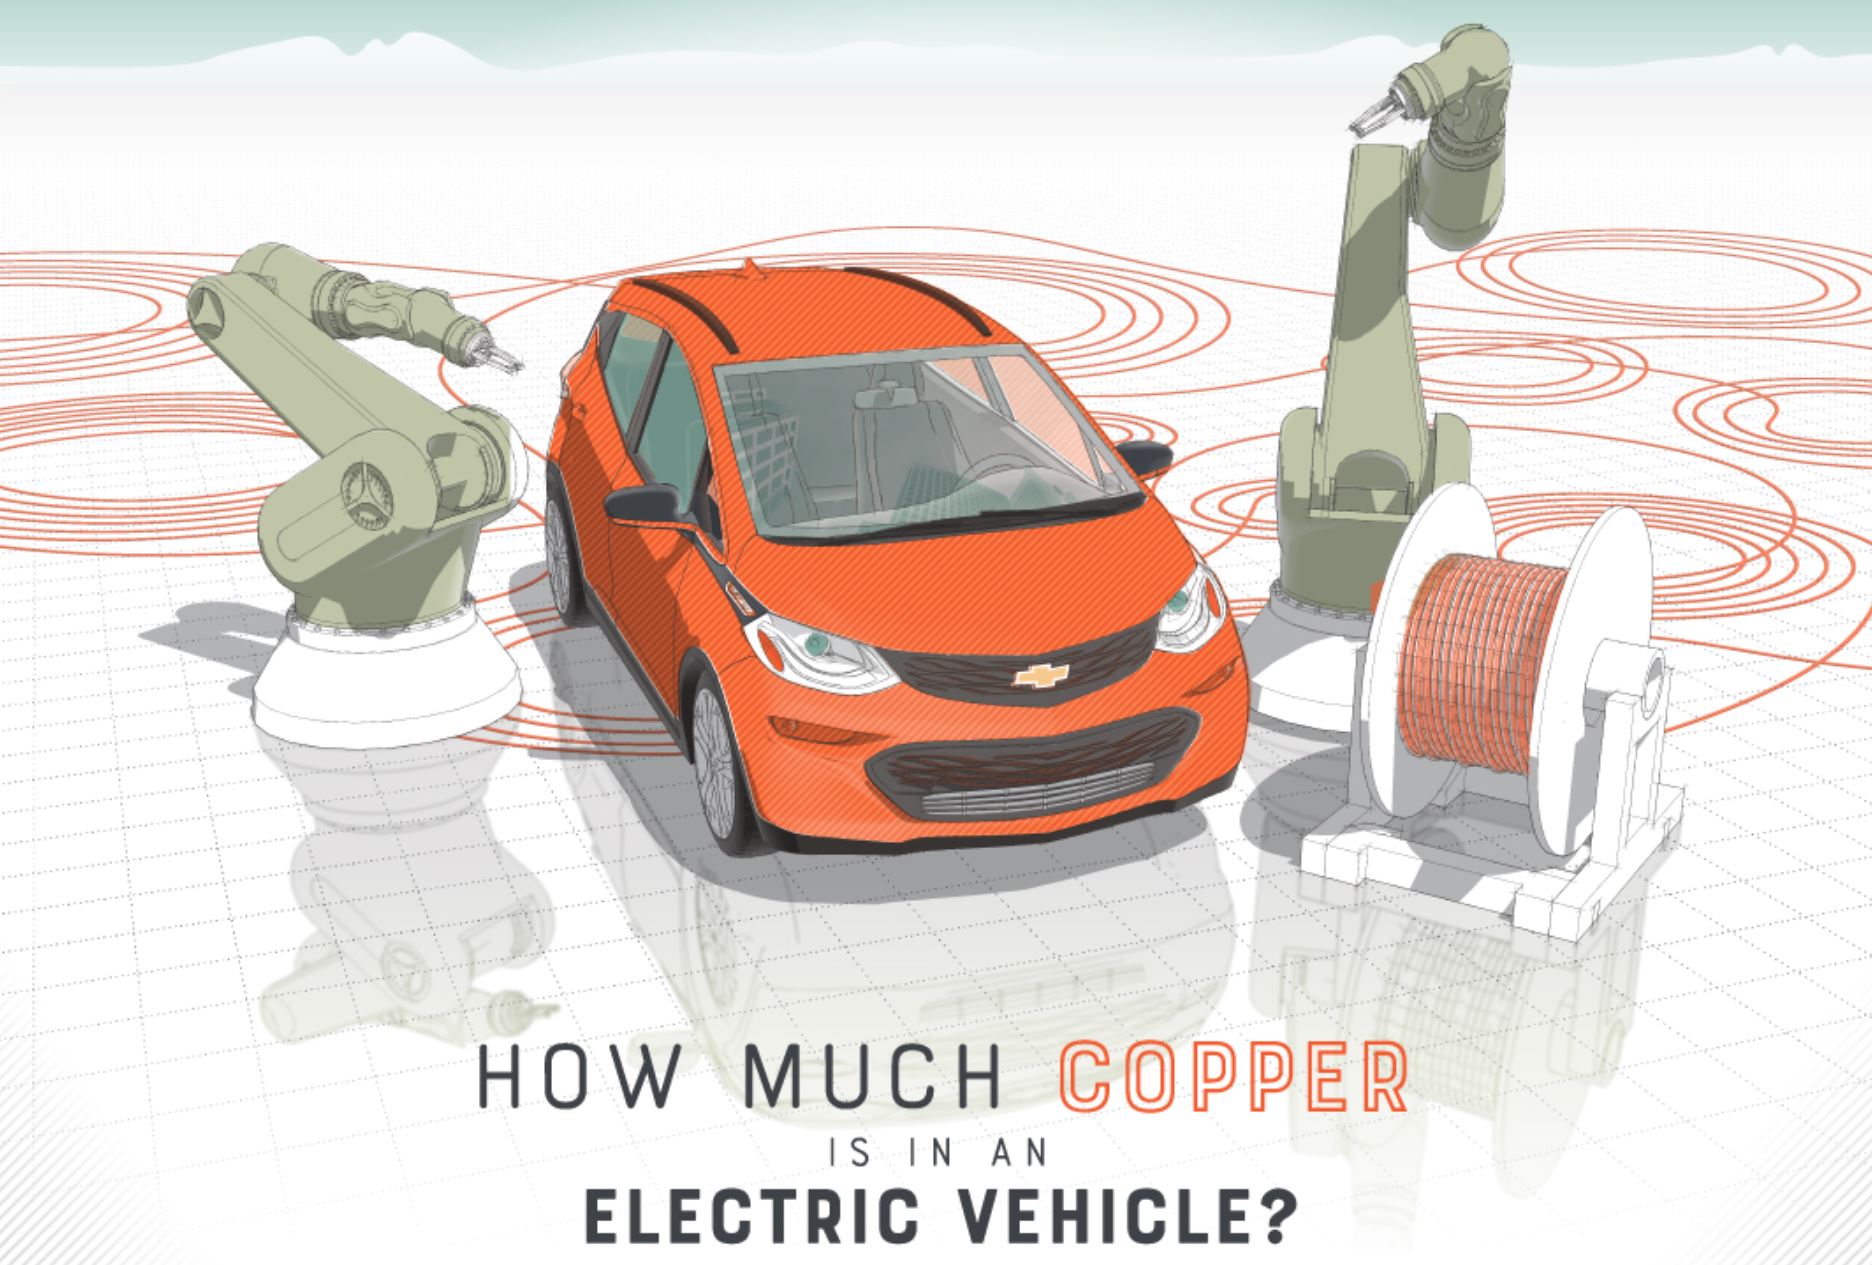 How Much Copper is in an Electric Vehicle Infographic? International